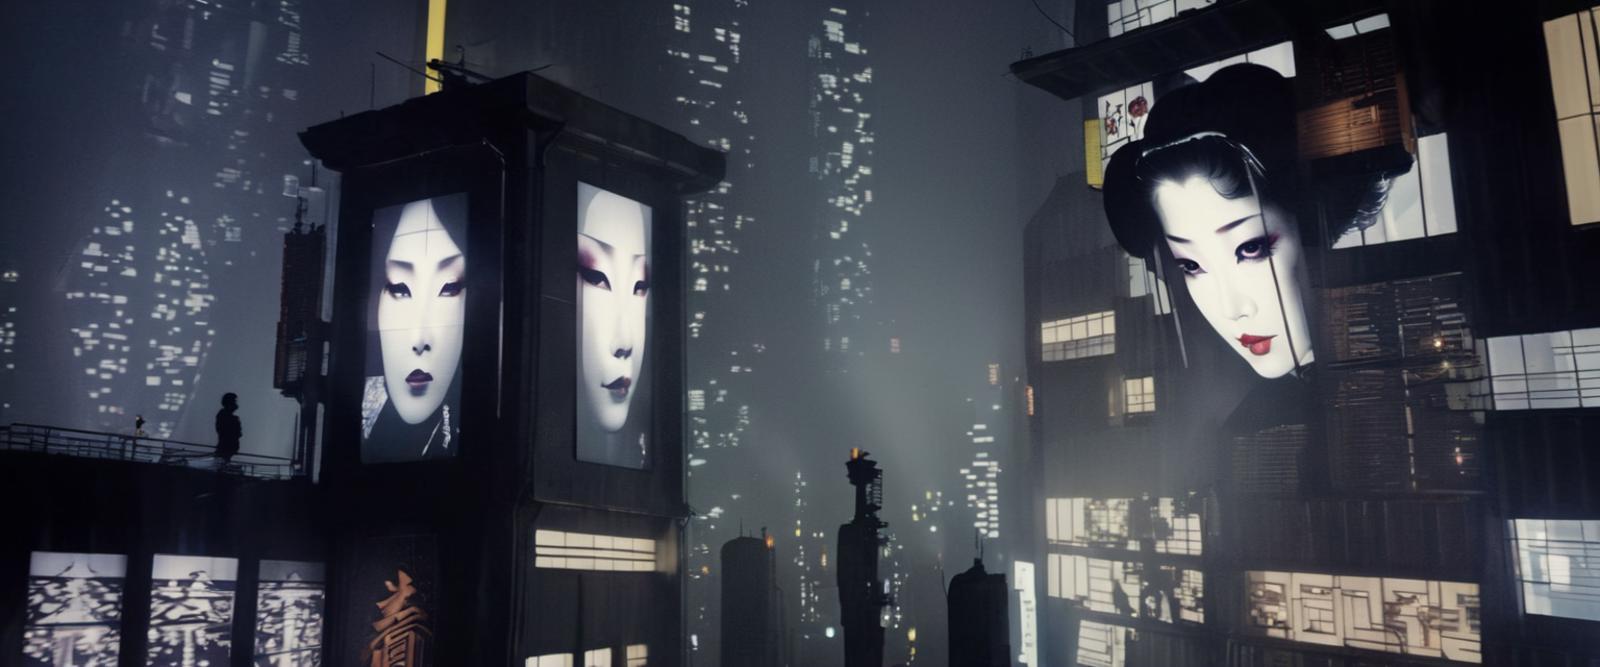 Blade Runner 1982 (Cityscapes) Movie Style image